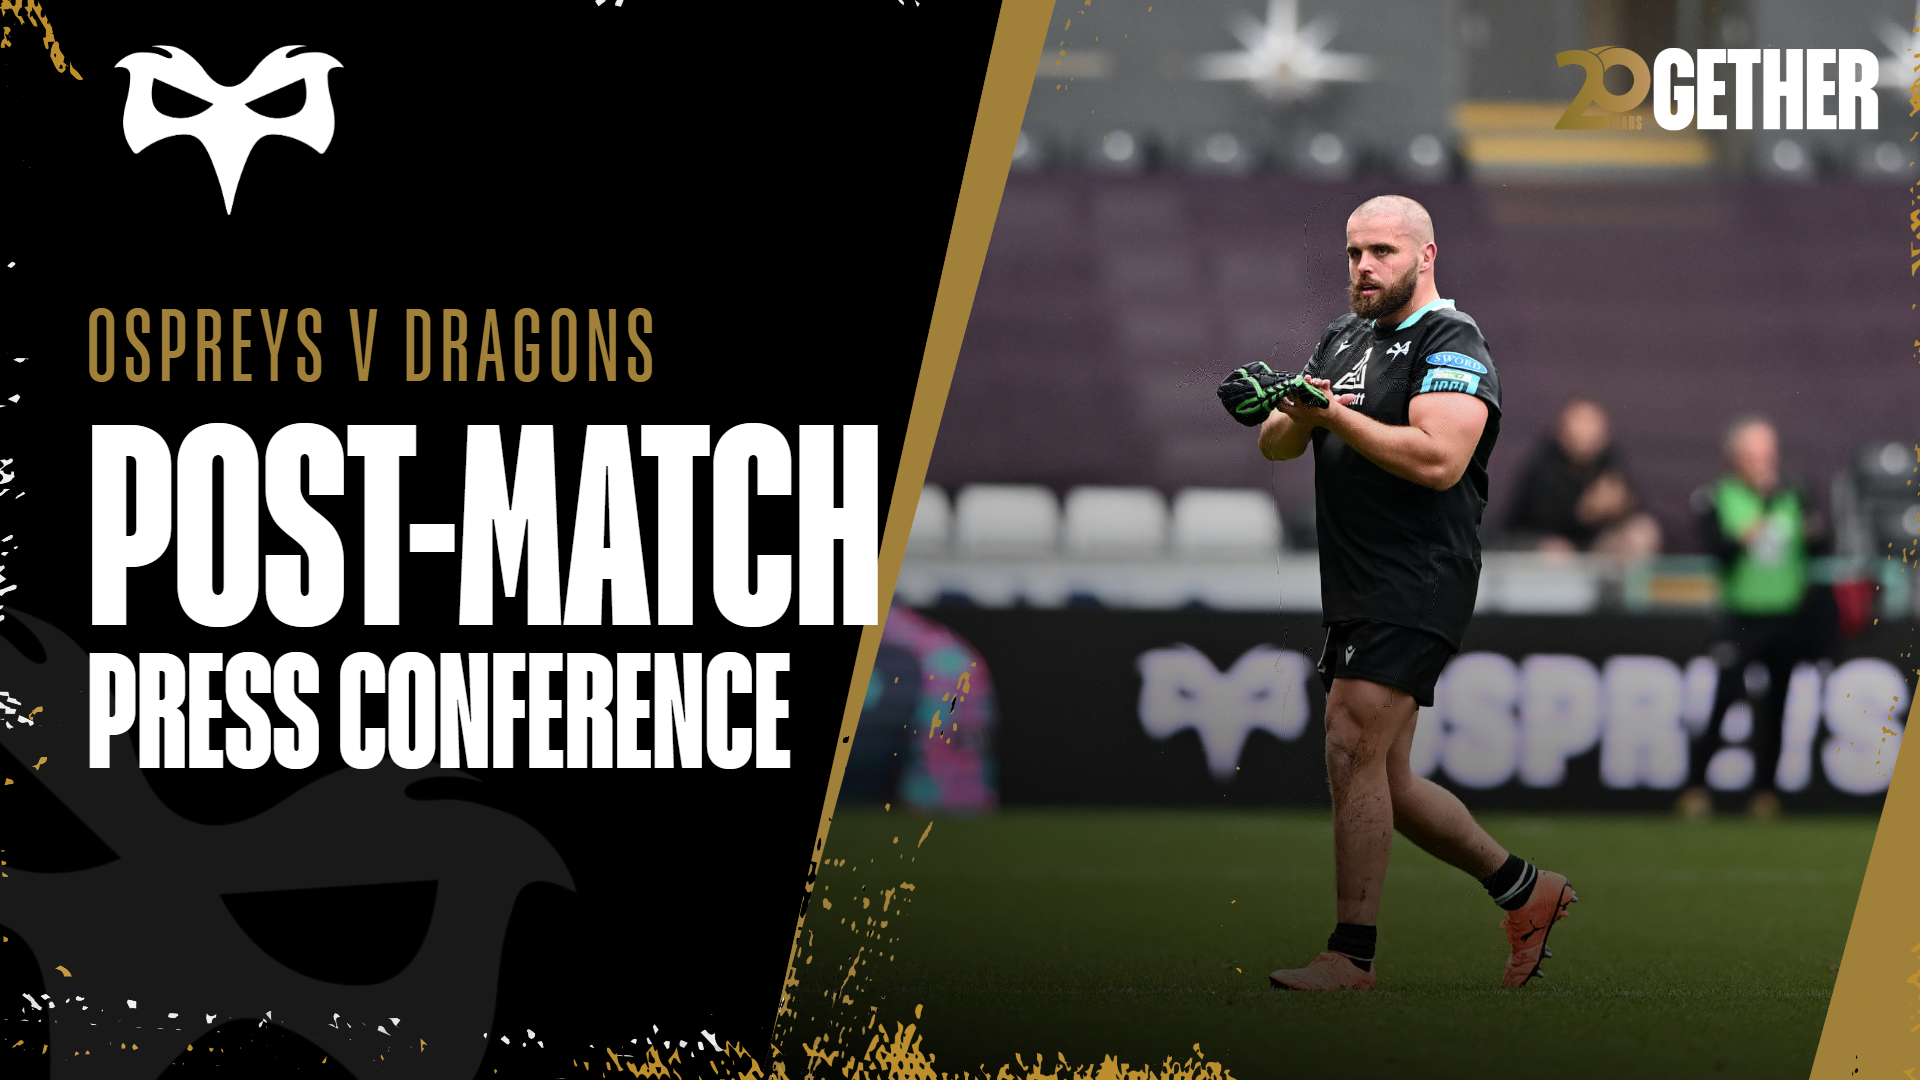 Post Match Press Conference: Toby Booth & Nicky Smith (Vs Dragons RFC)